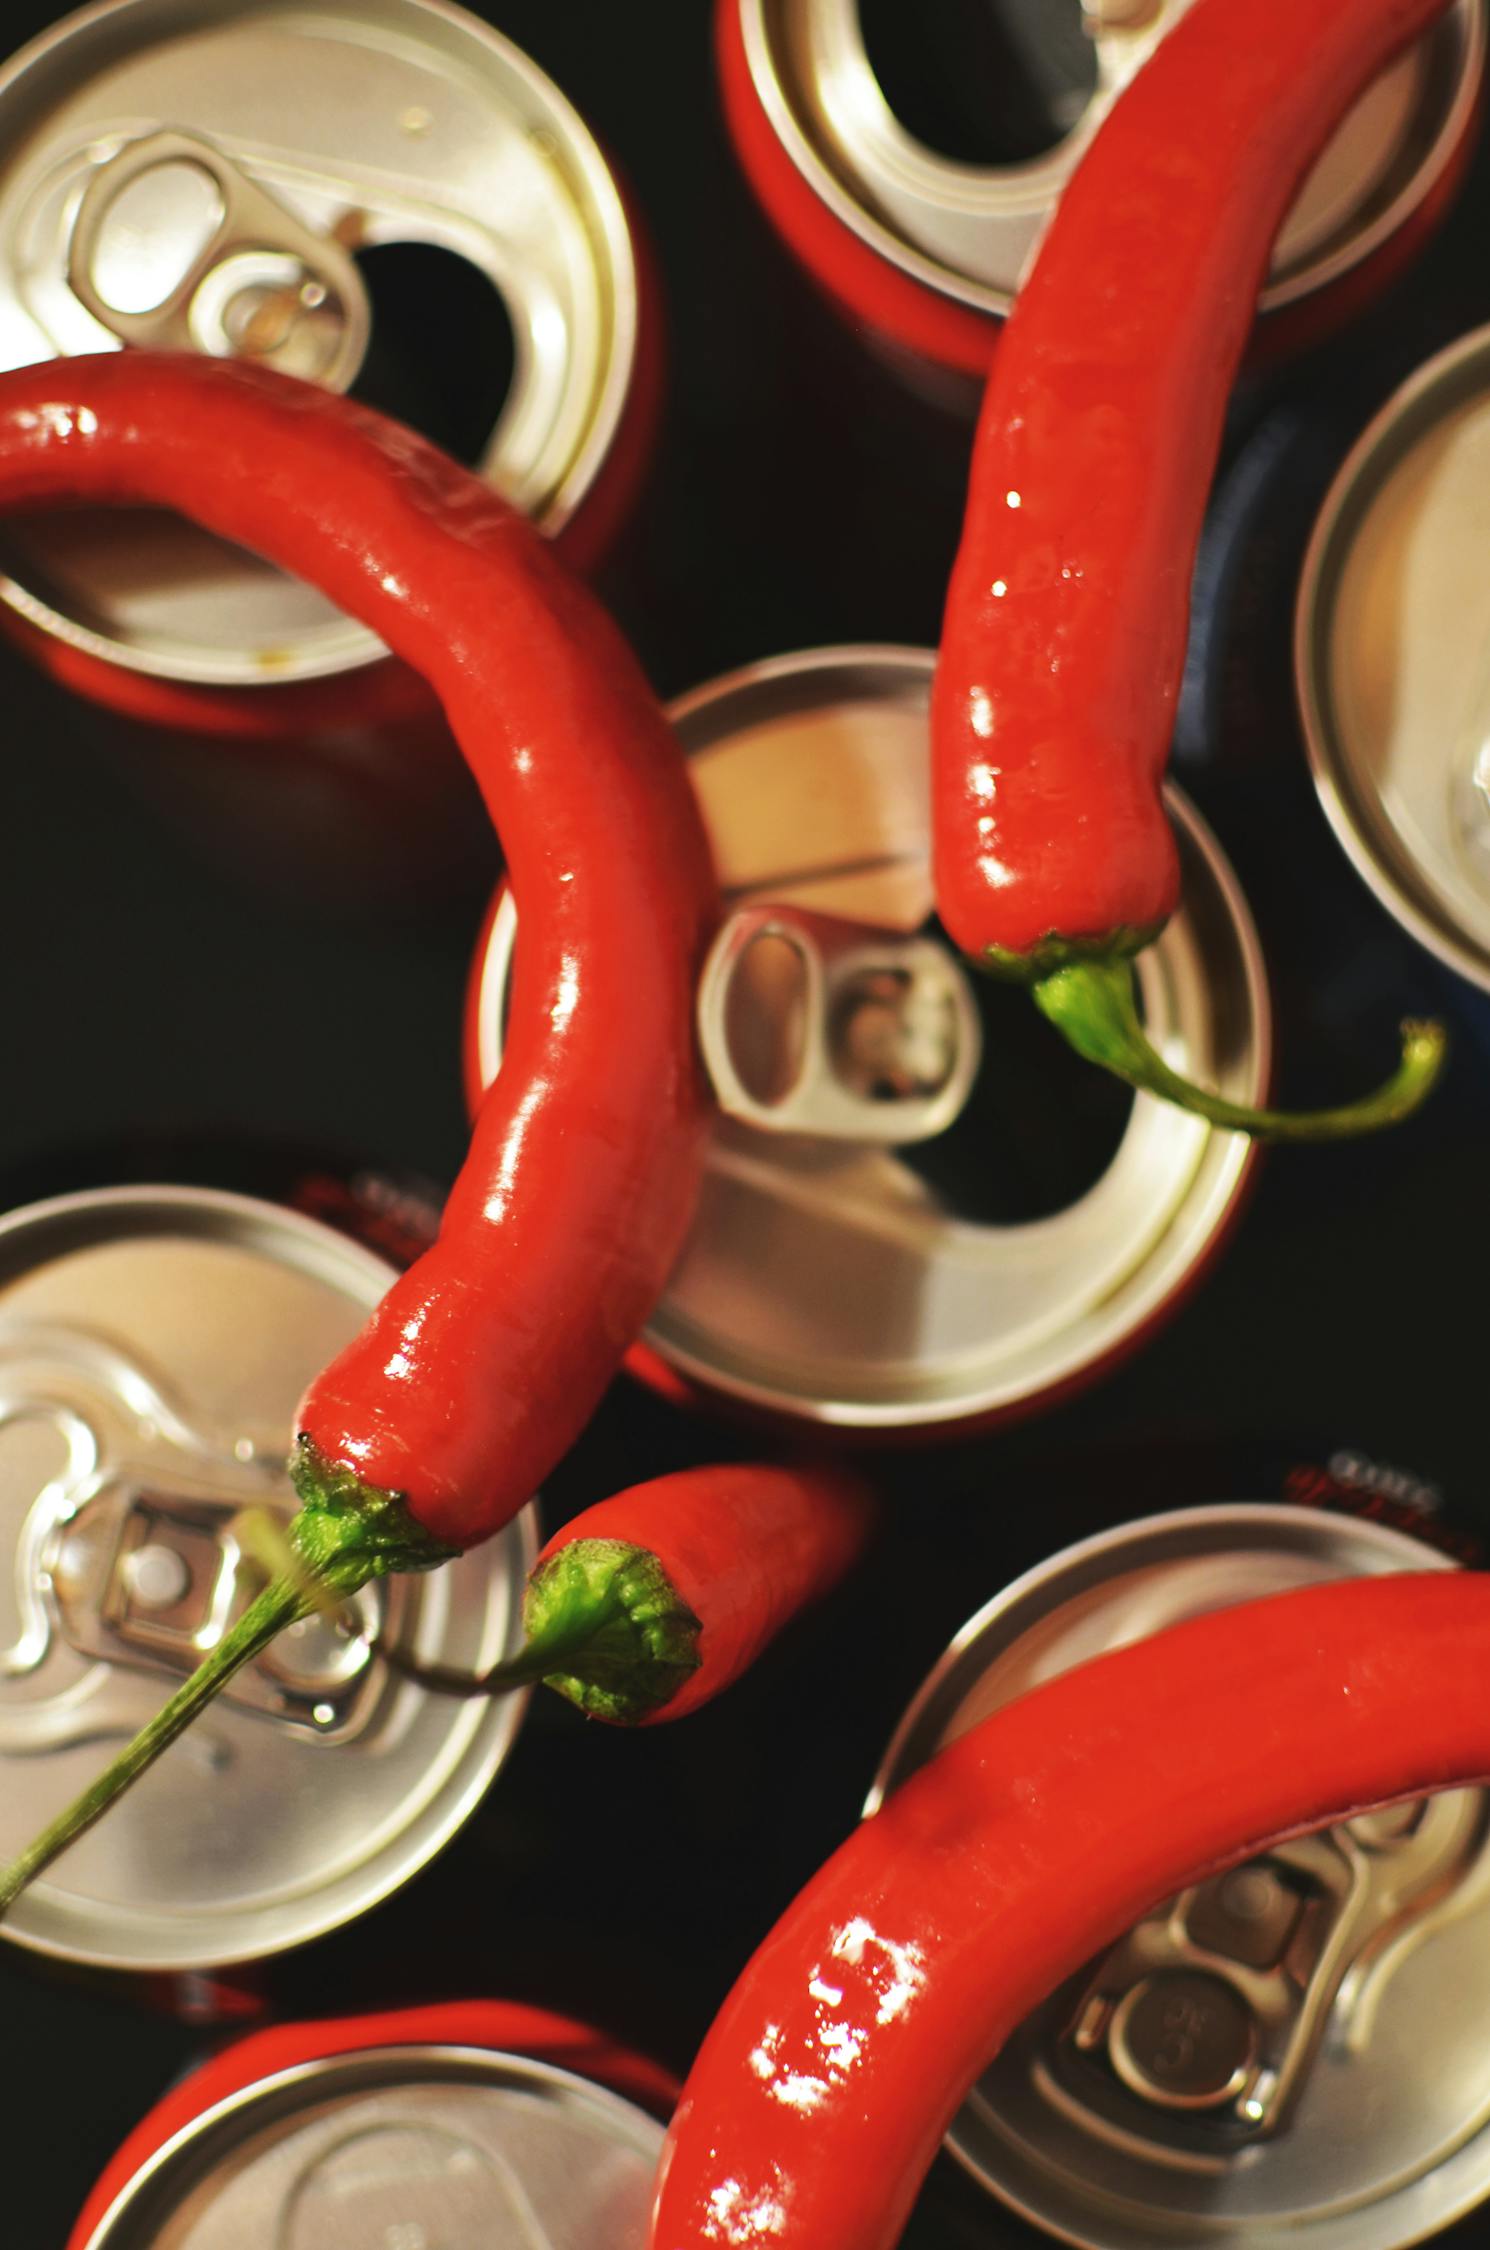 Four Red Chili on Top of Cans · Free Stock Photo